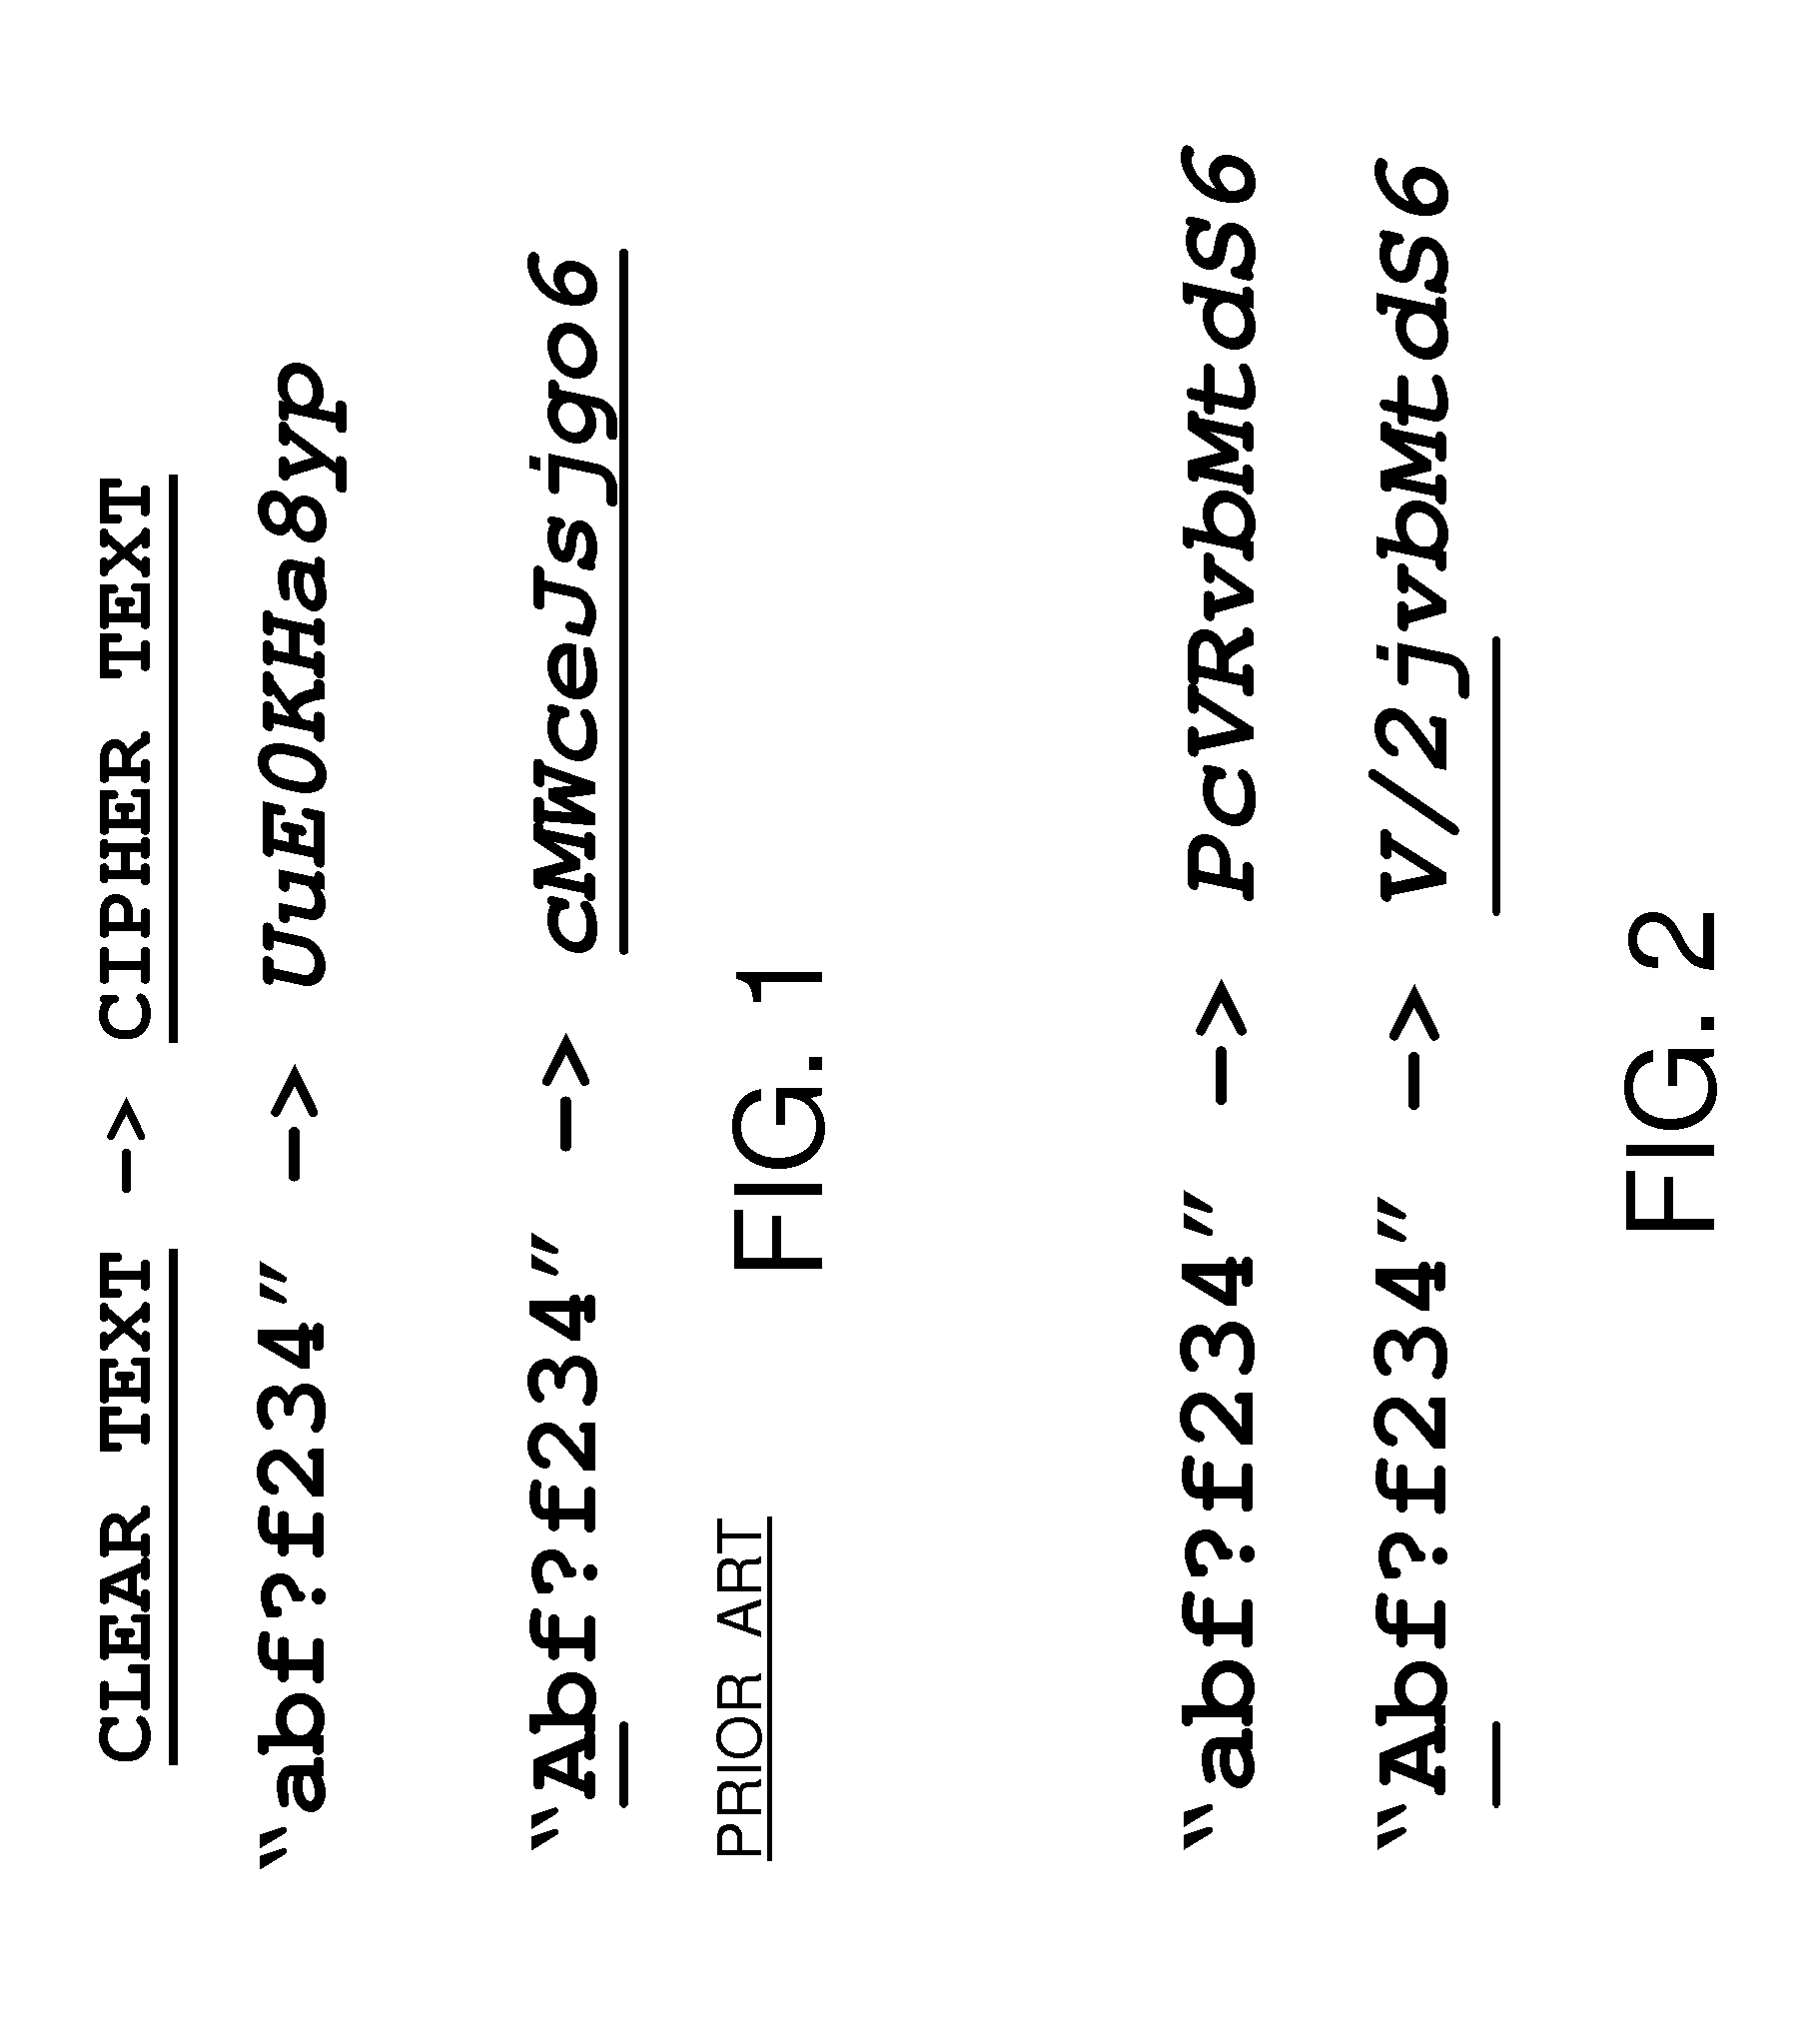 Partial CipherText Updates Using Variable-Length Segments Delineated by Pattern Matching and Encrypted by Fixed-Length Blocks